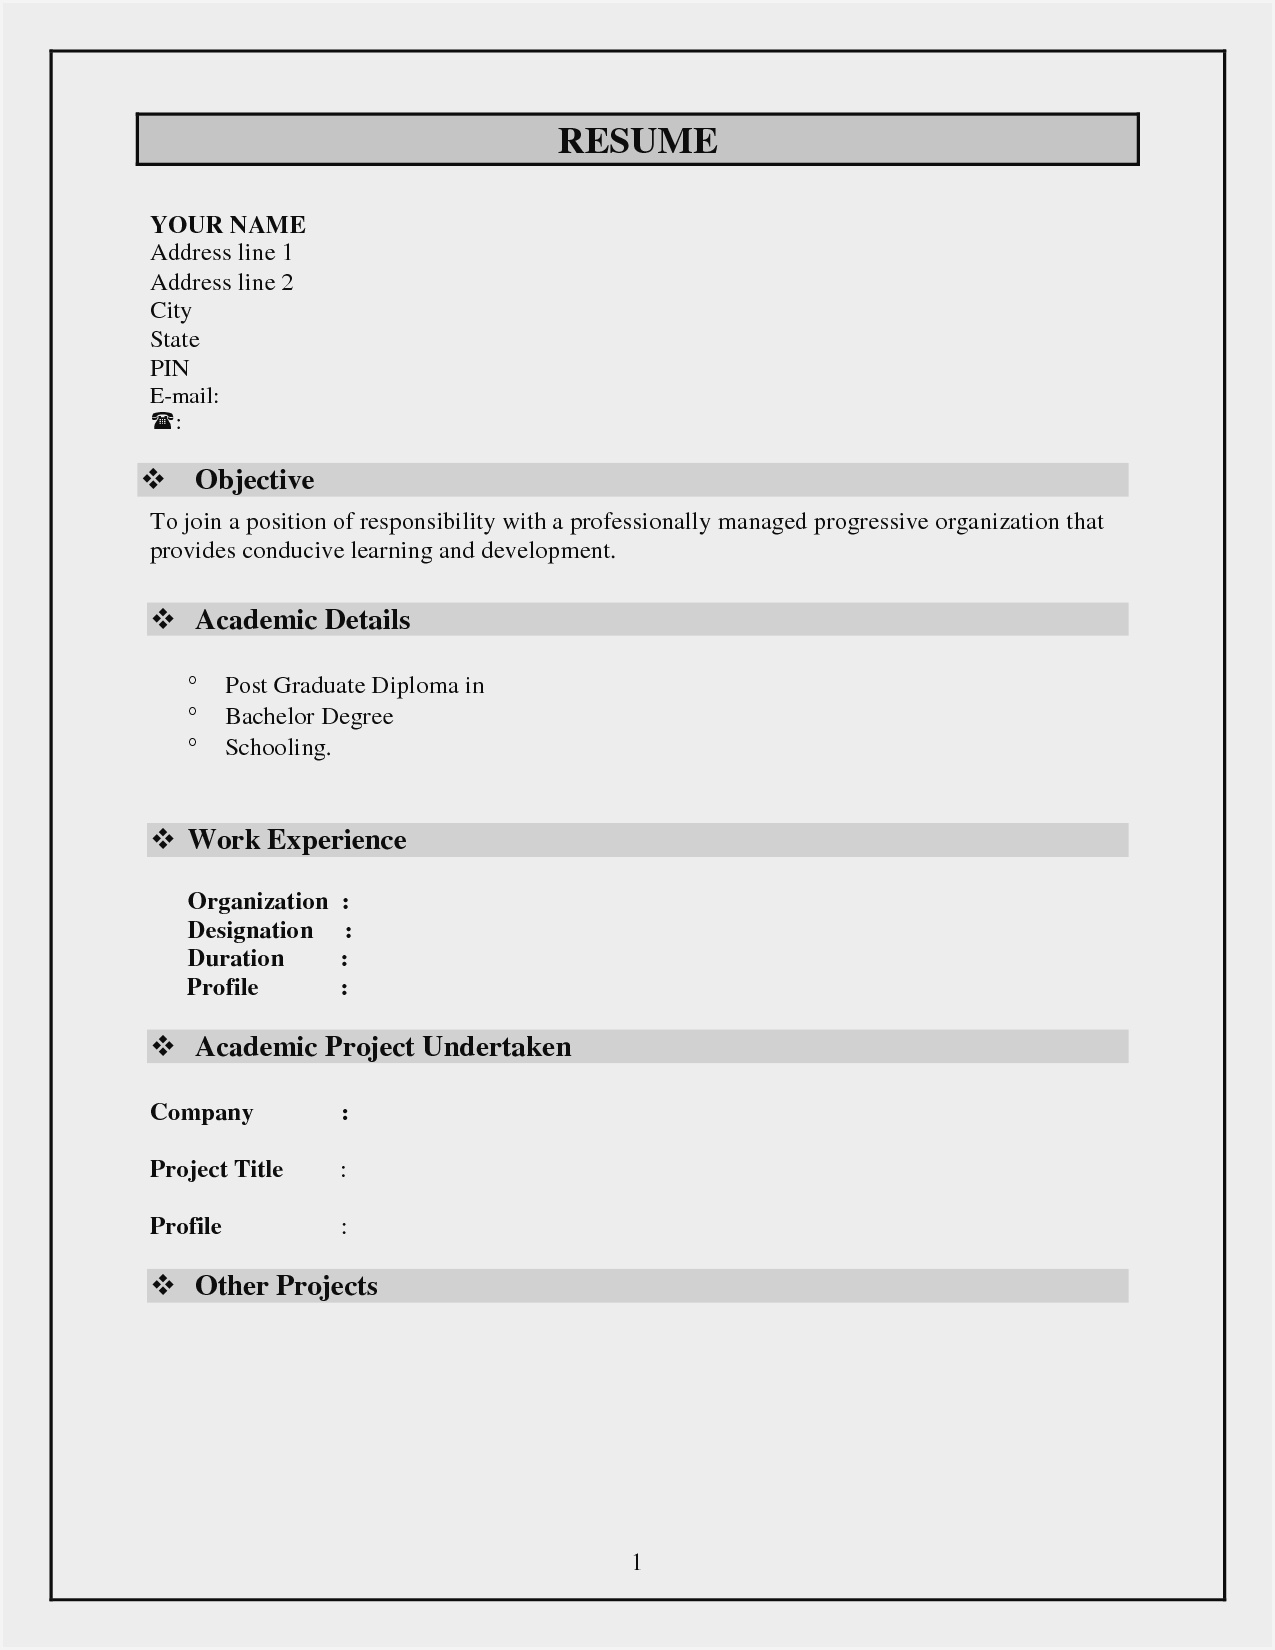 Blank Resume Format Pdf Free Download – Resume : Resume With Regard To Blank Resume Templates For Microsoft Word